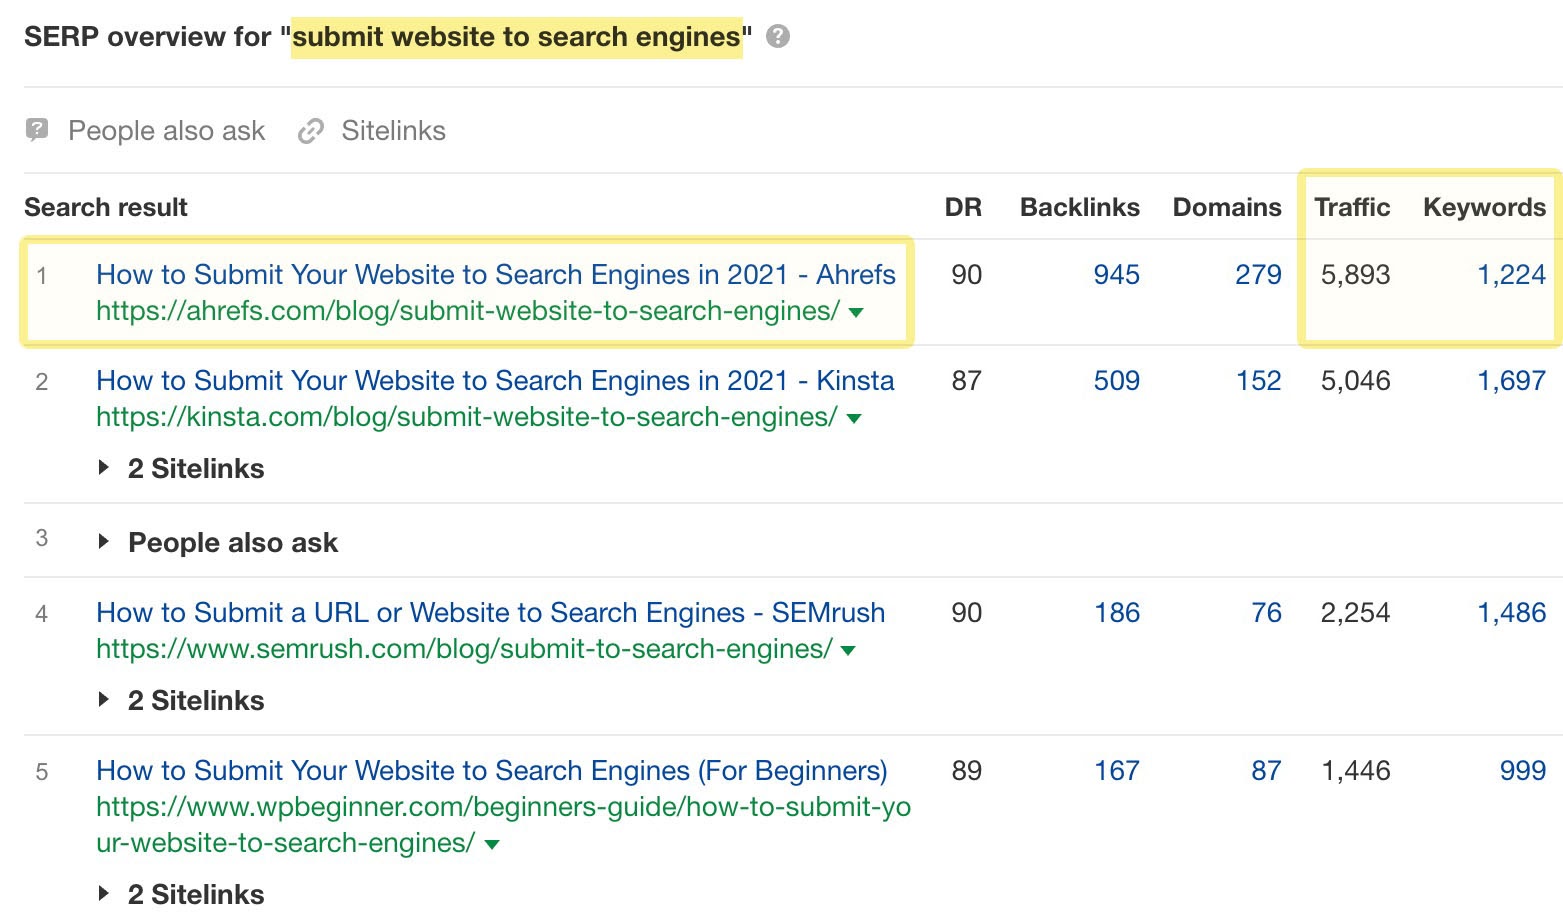 SERP overview for "submit website to search engines"